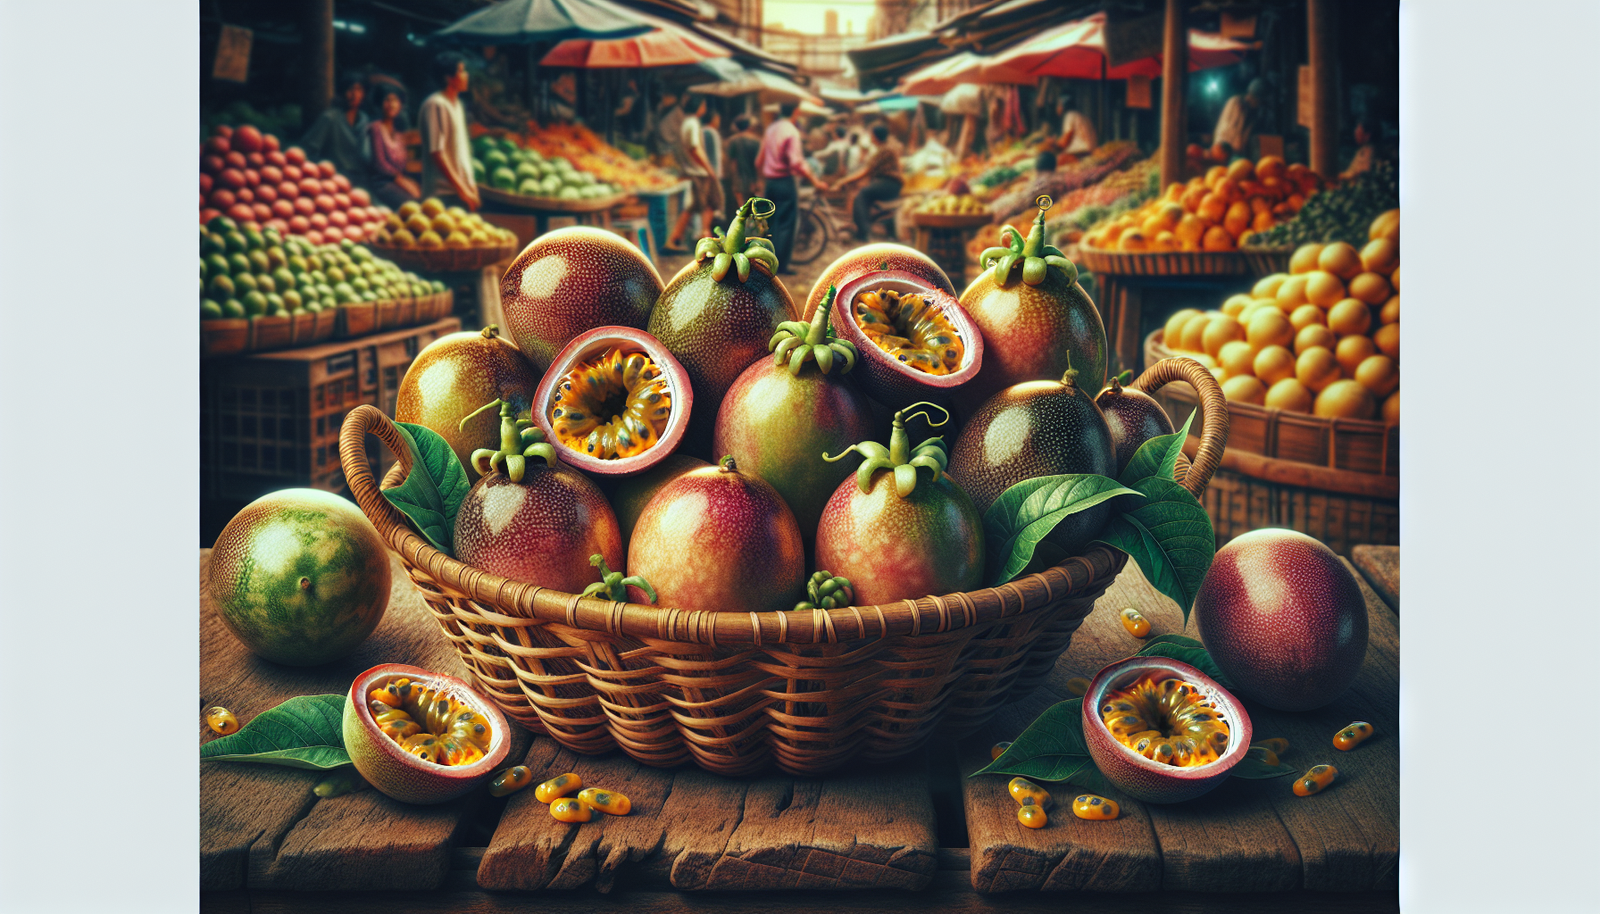 Where To Buy Passion Fruit